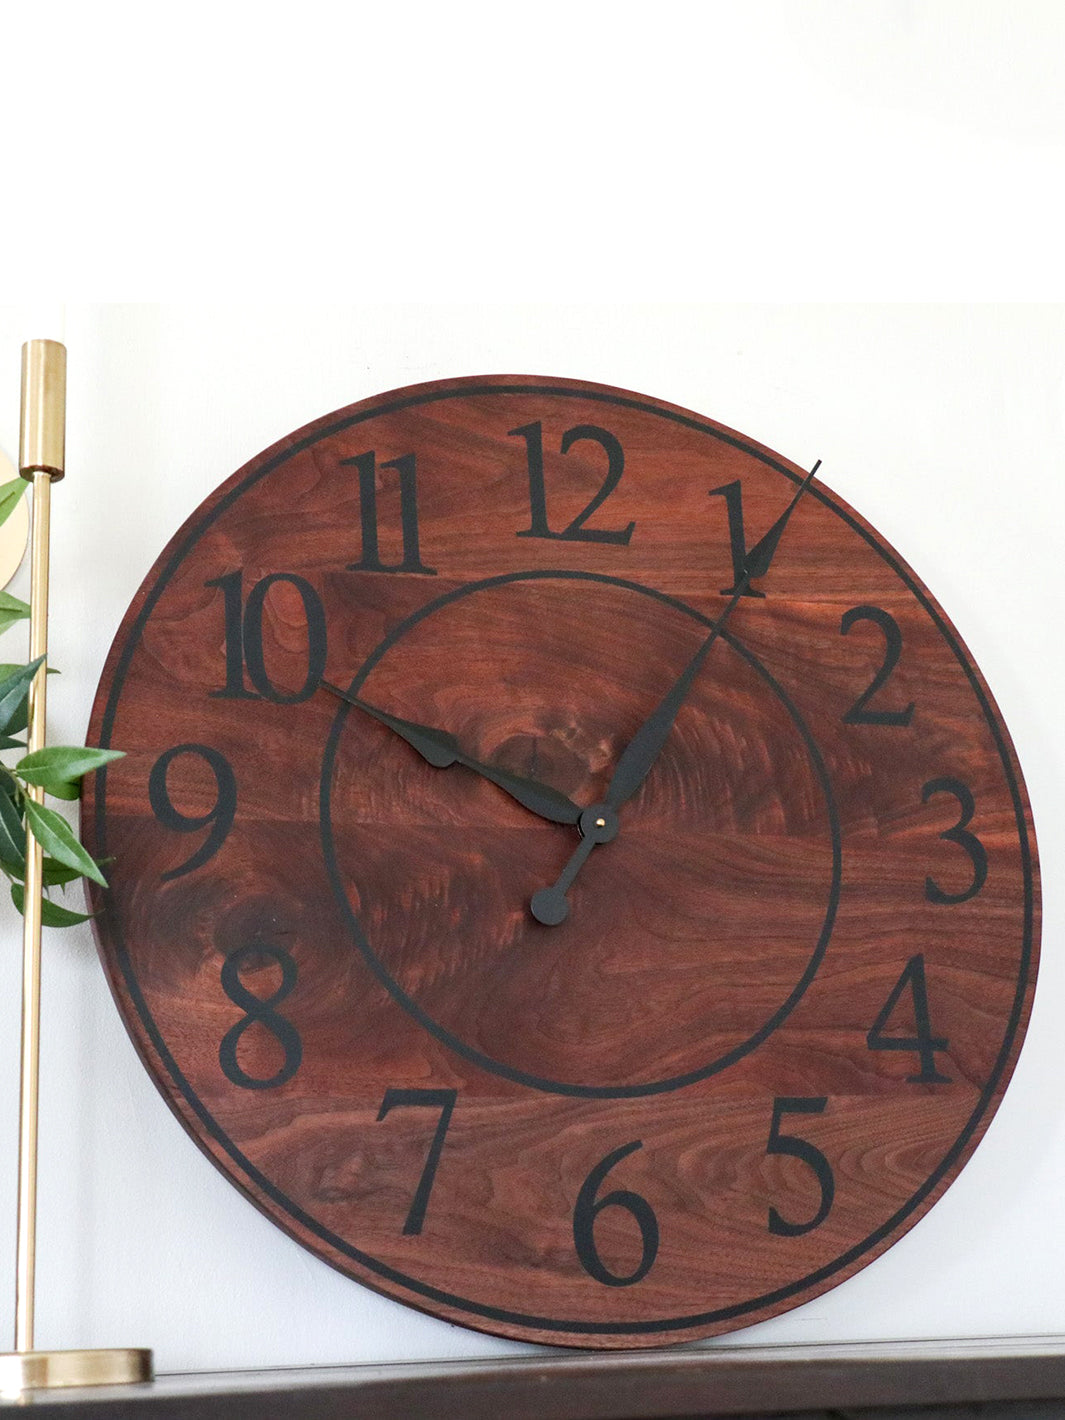 Solid Walnut Wood Wall Clock with Black Numbers